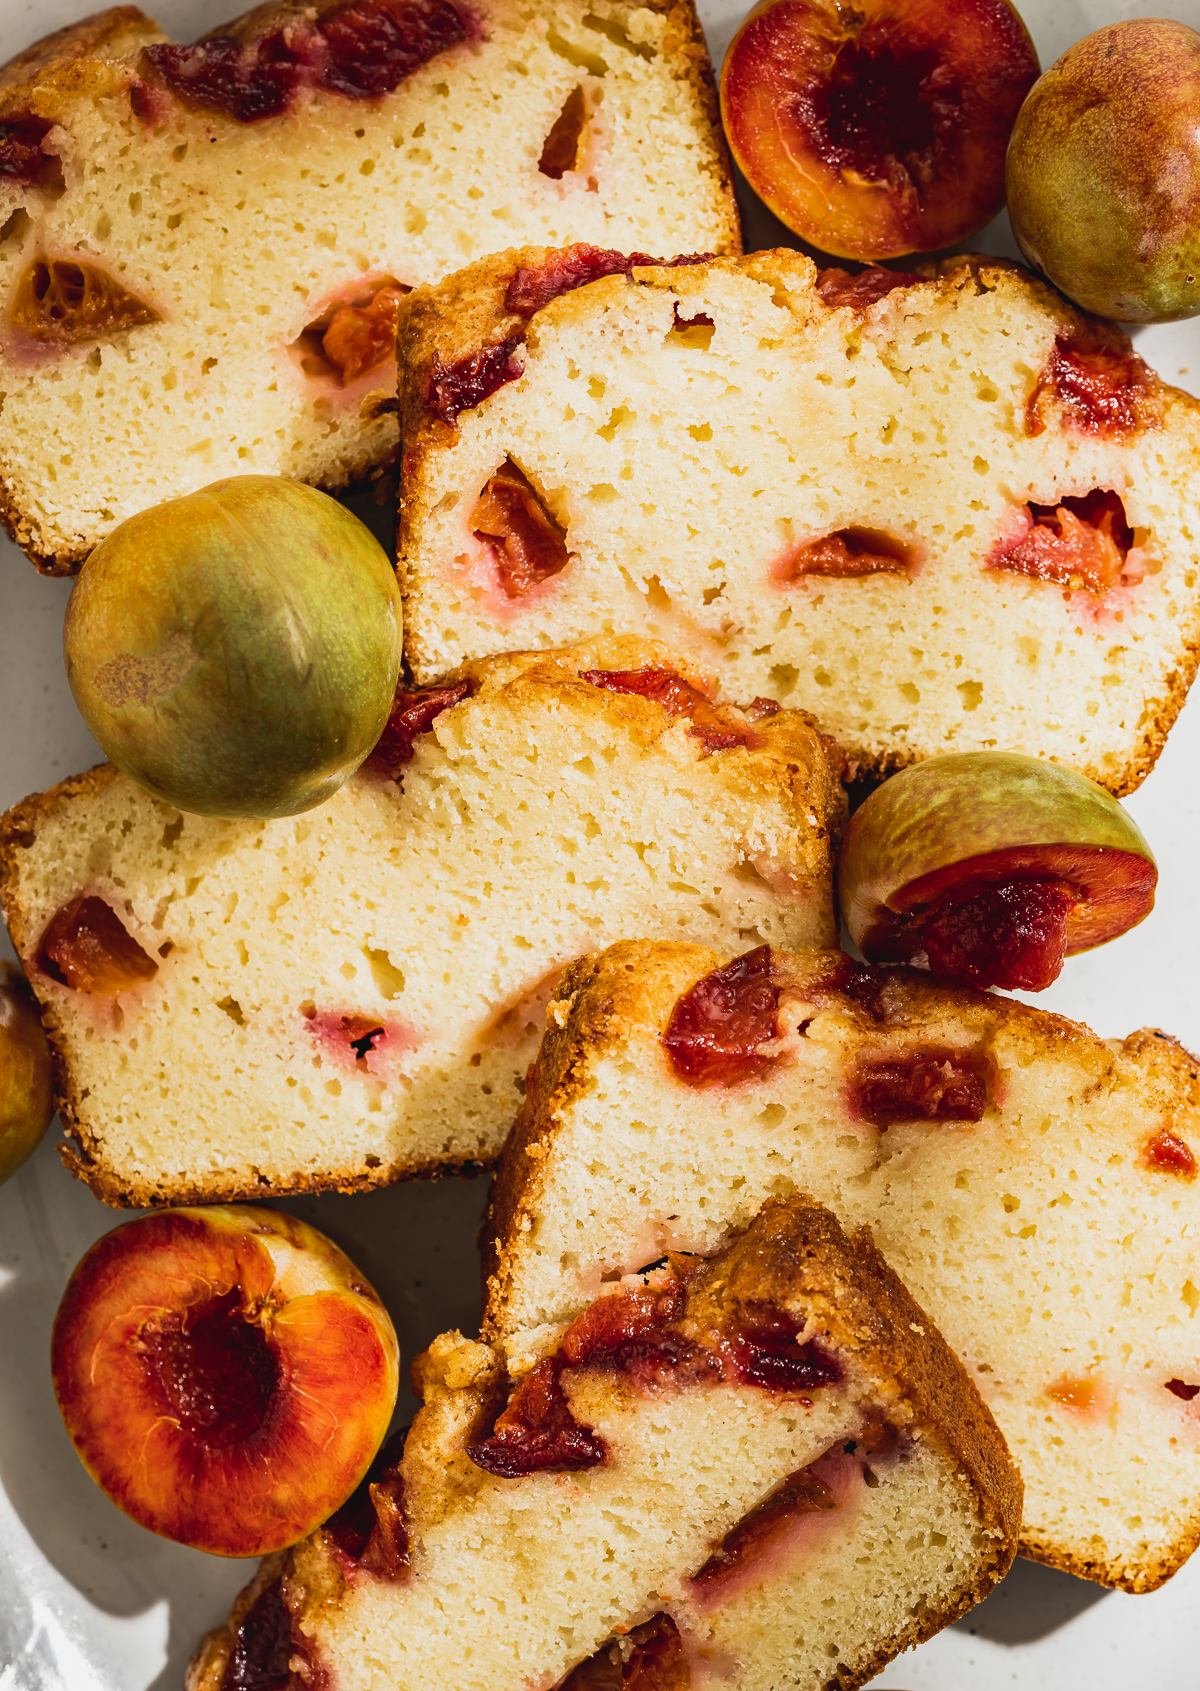 slices of plum pound cake on platter with whole and halved plums